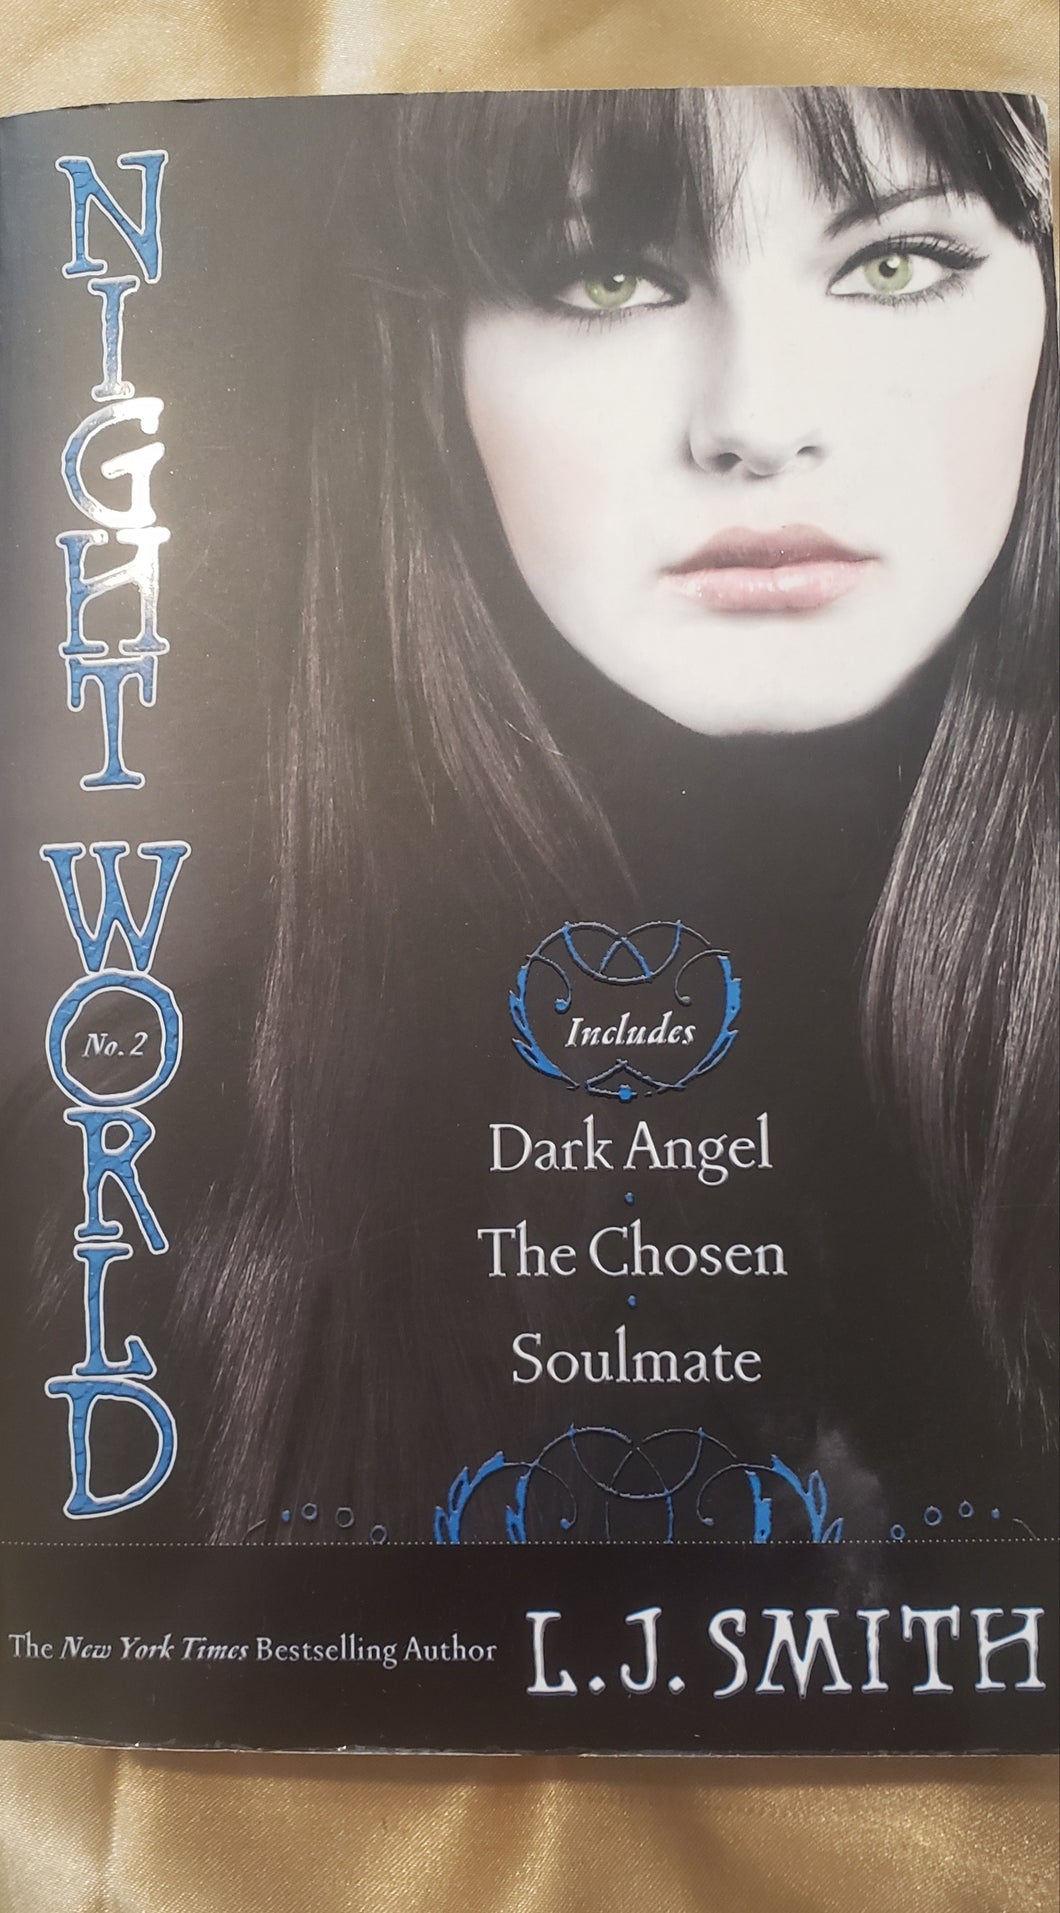 Night World No. 2 by L.J. Smith includes Dark Angel, The Chosen, and Soulmate